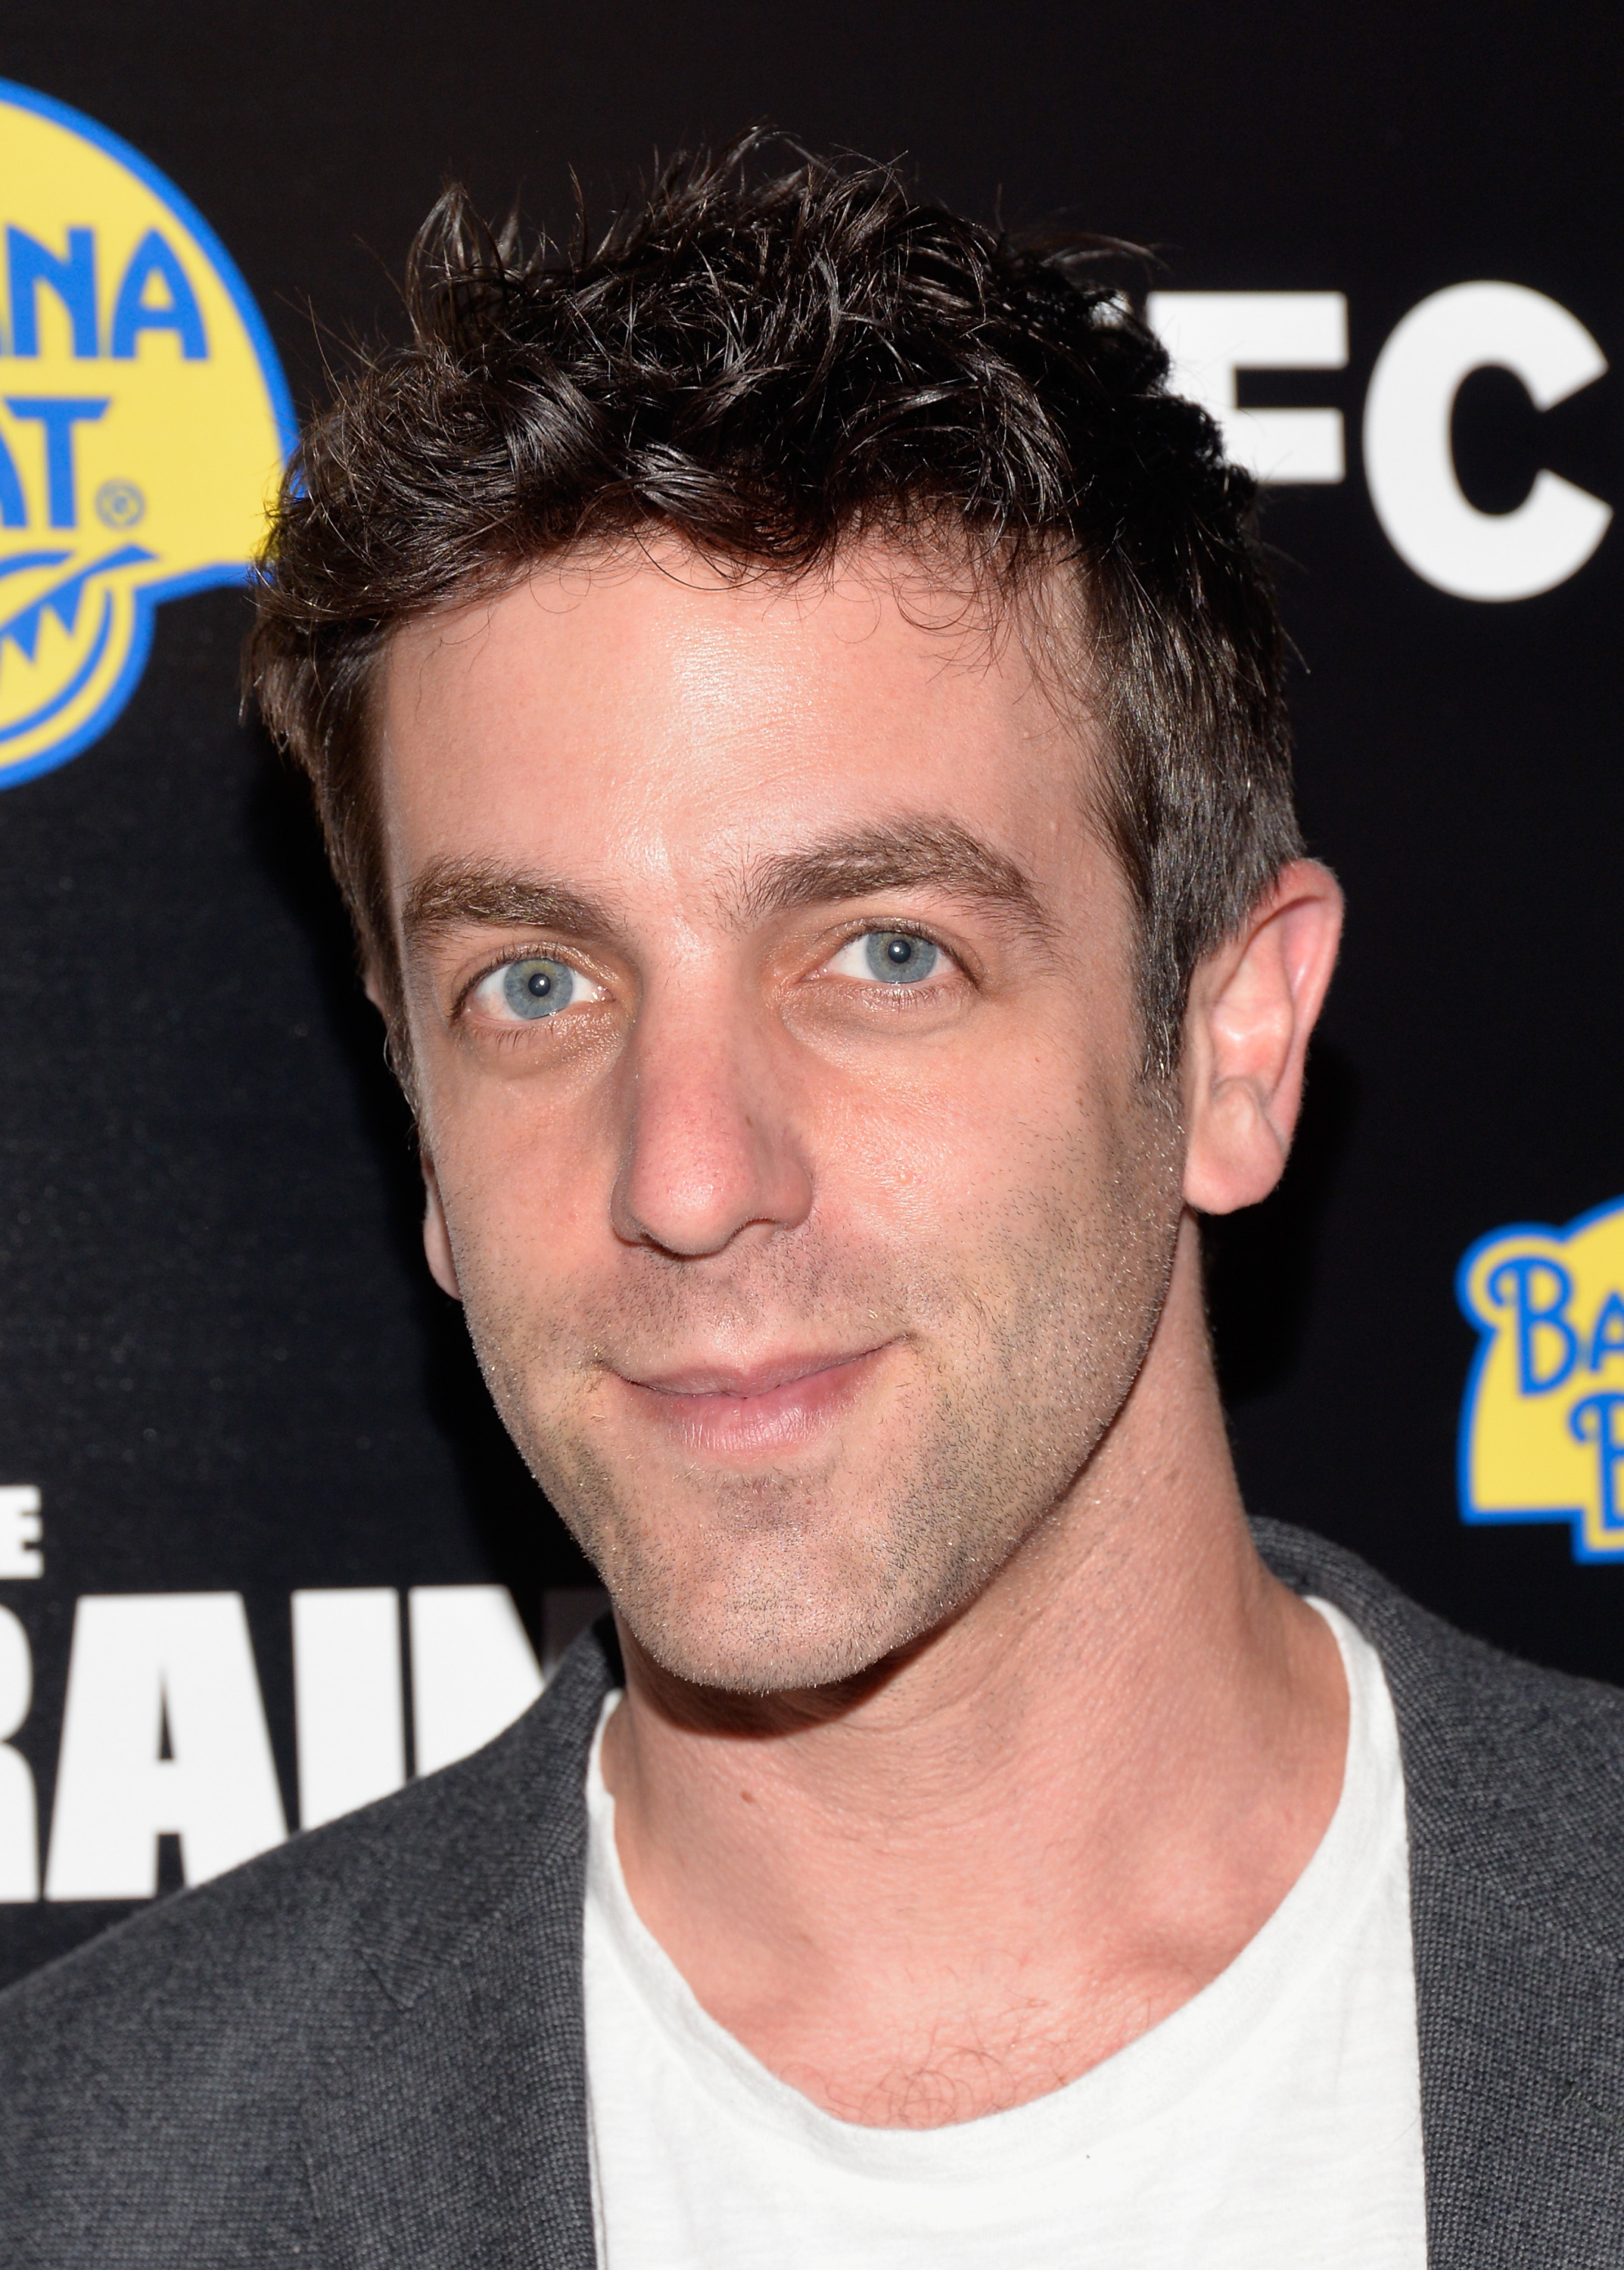 Actor B.J. Novak attends the premiere of IFC Films' "The D Train" at ArcLight Hollywood on April 27, 2015 in Hollywood, California. (Michael Tullberg&mdash;Getty Images)